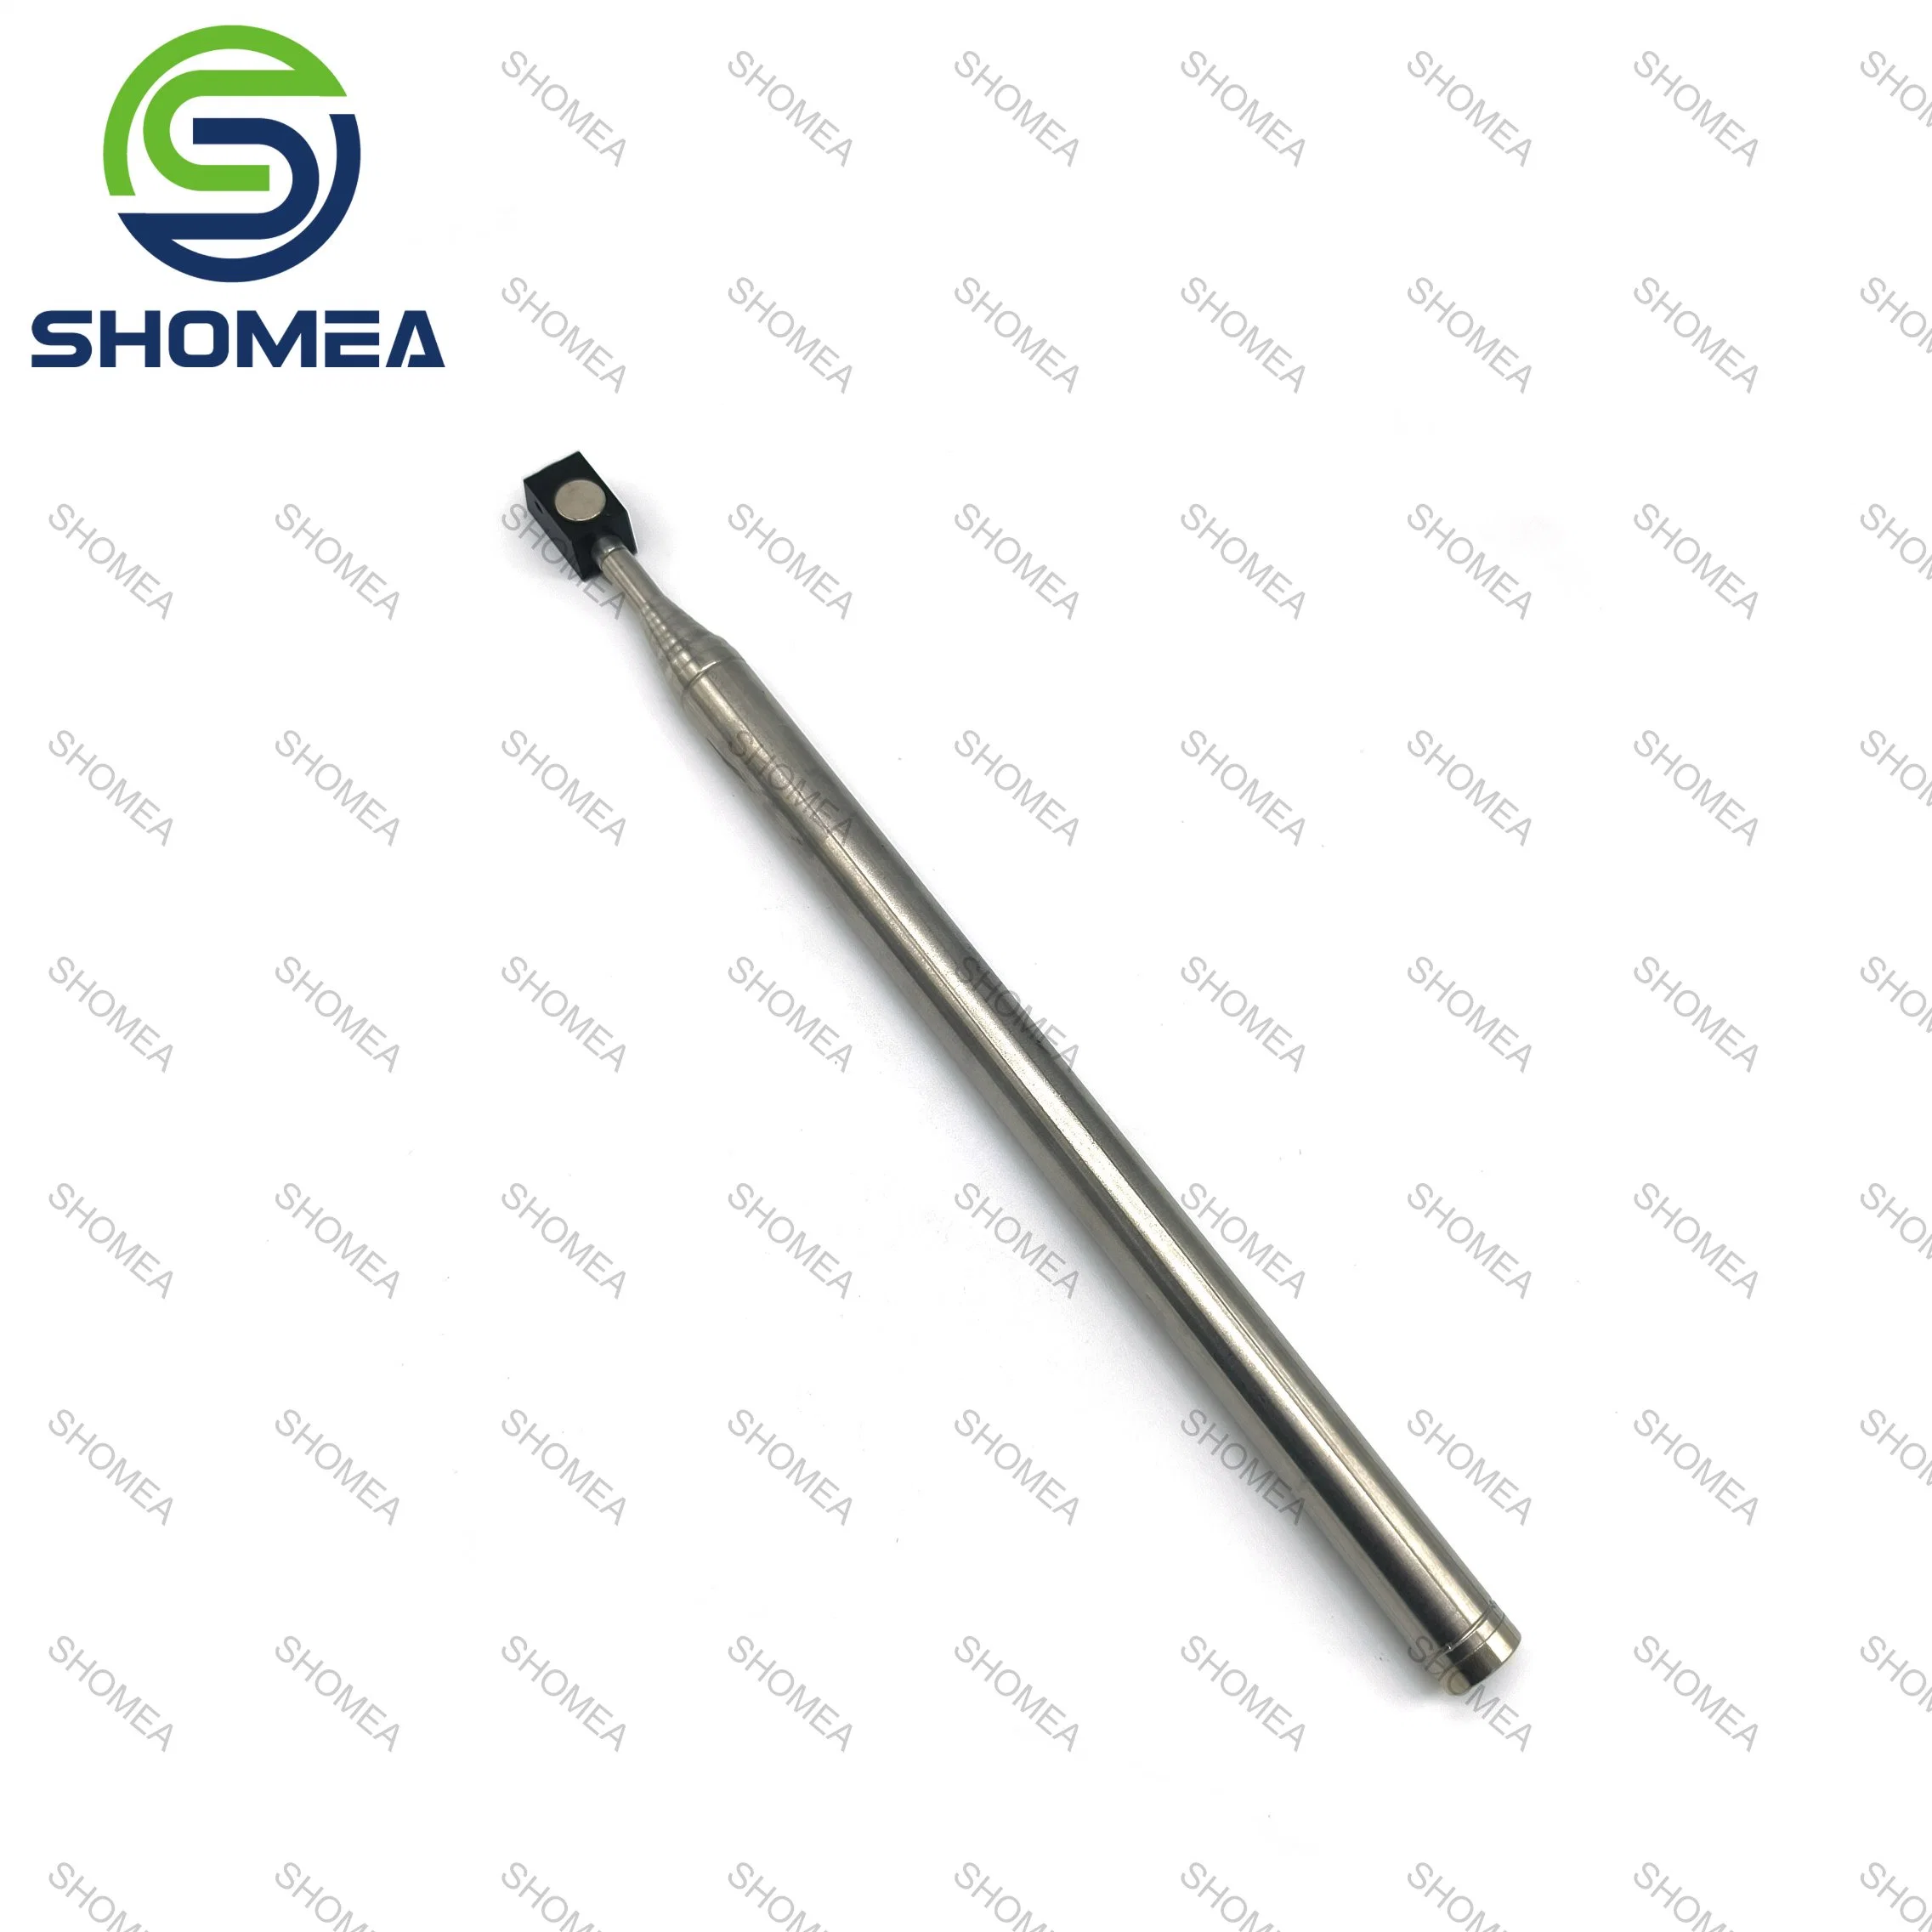 Shomea Customized High Polishing Stainless Steel Telescopic Pole with Maganetic Head